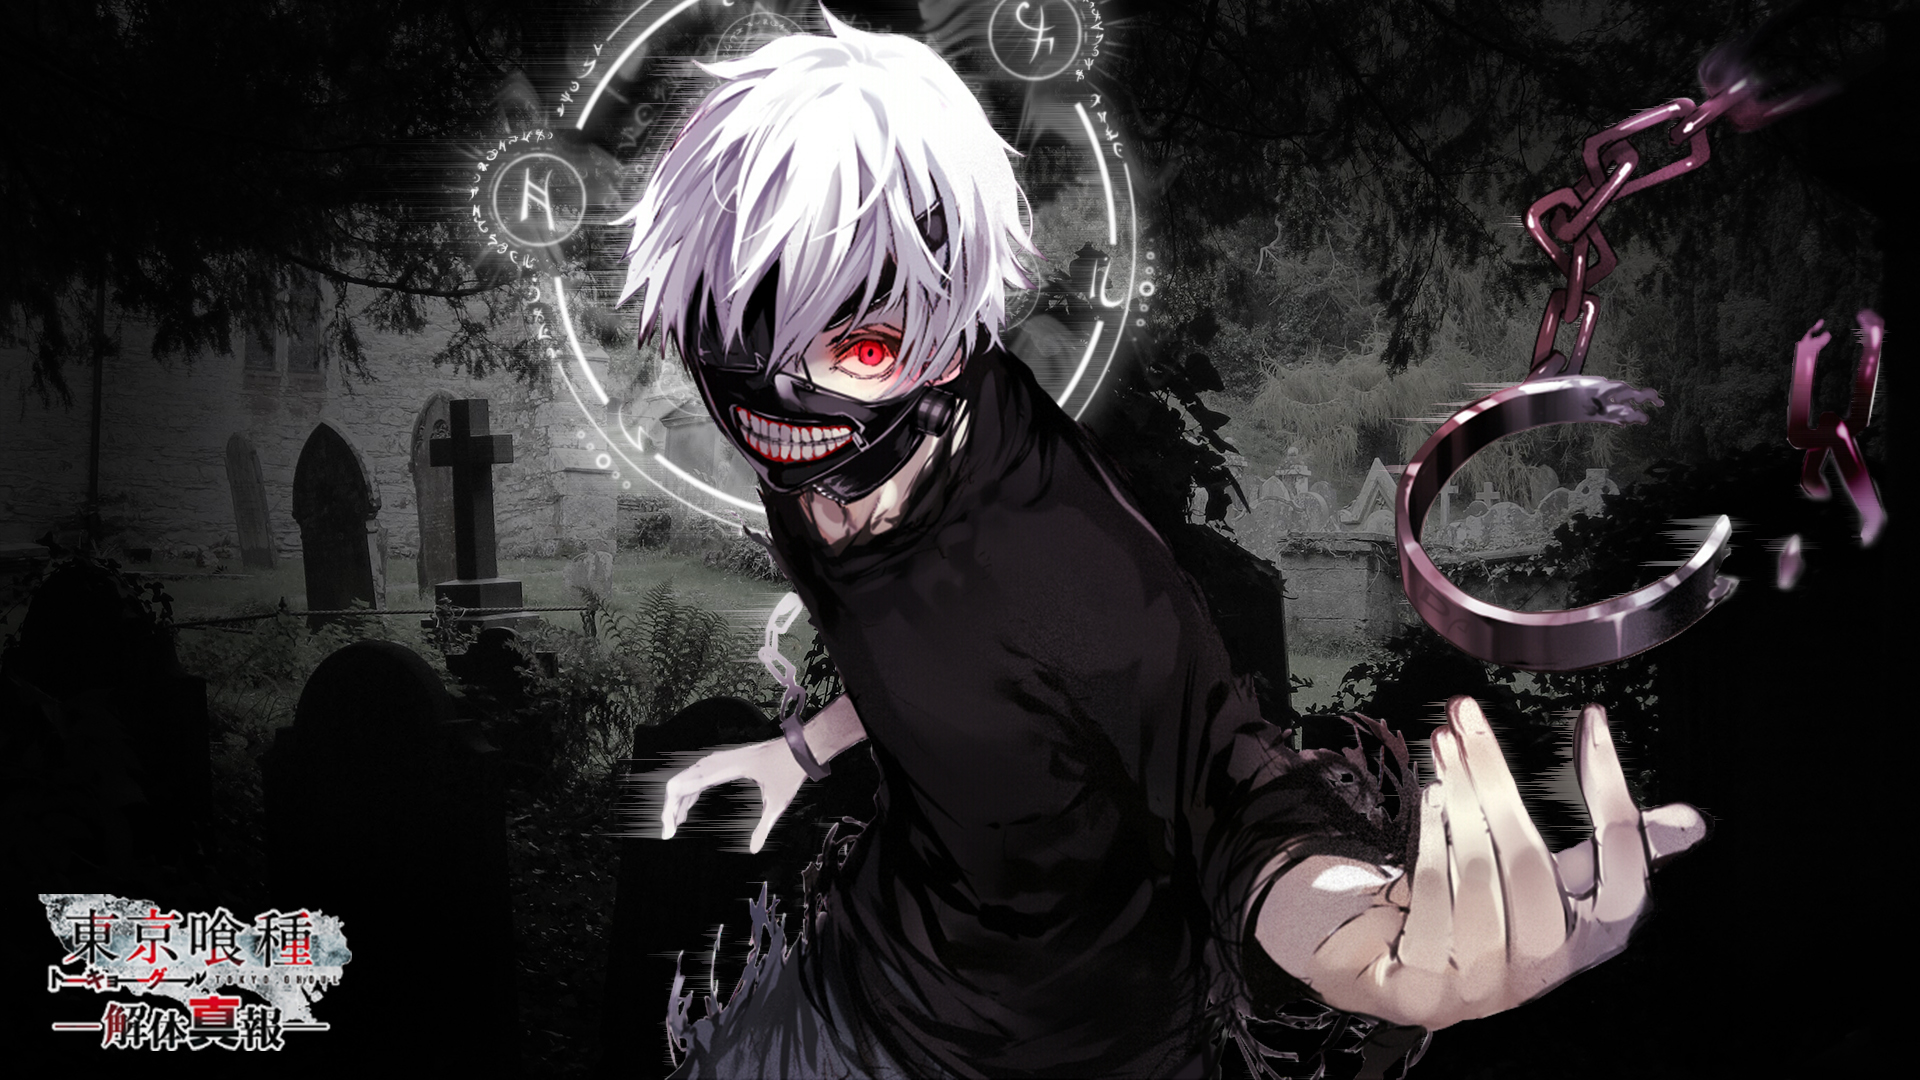 Free download ANIME] Tokyo Ghoul Coleccionable ANIME MKV 720 Emision  [1920x1080] for your Desktop, Mobile & Tablet | Explore 50+ Tokyo Ghoul  Root A Wallpaper | Tokyo Ghoul Wallpaper, Tokyo Ghoul Wallpaper